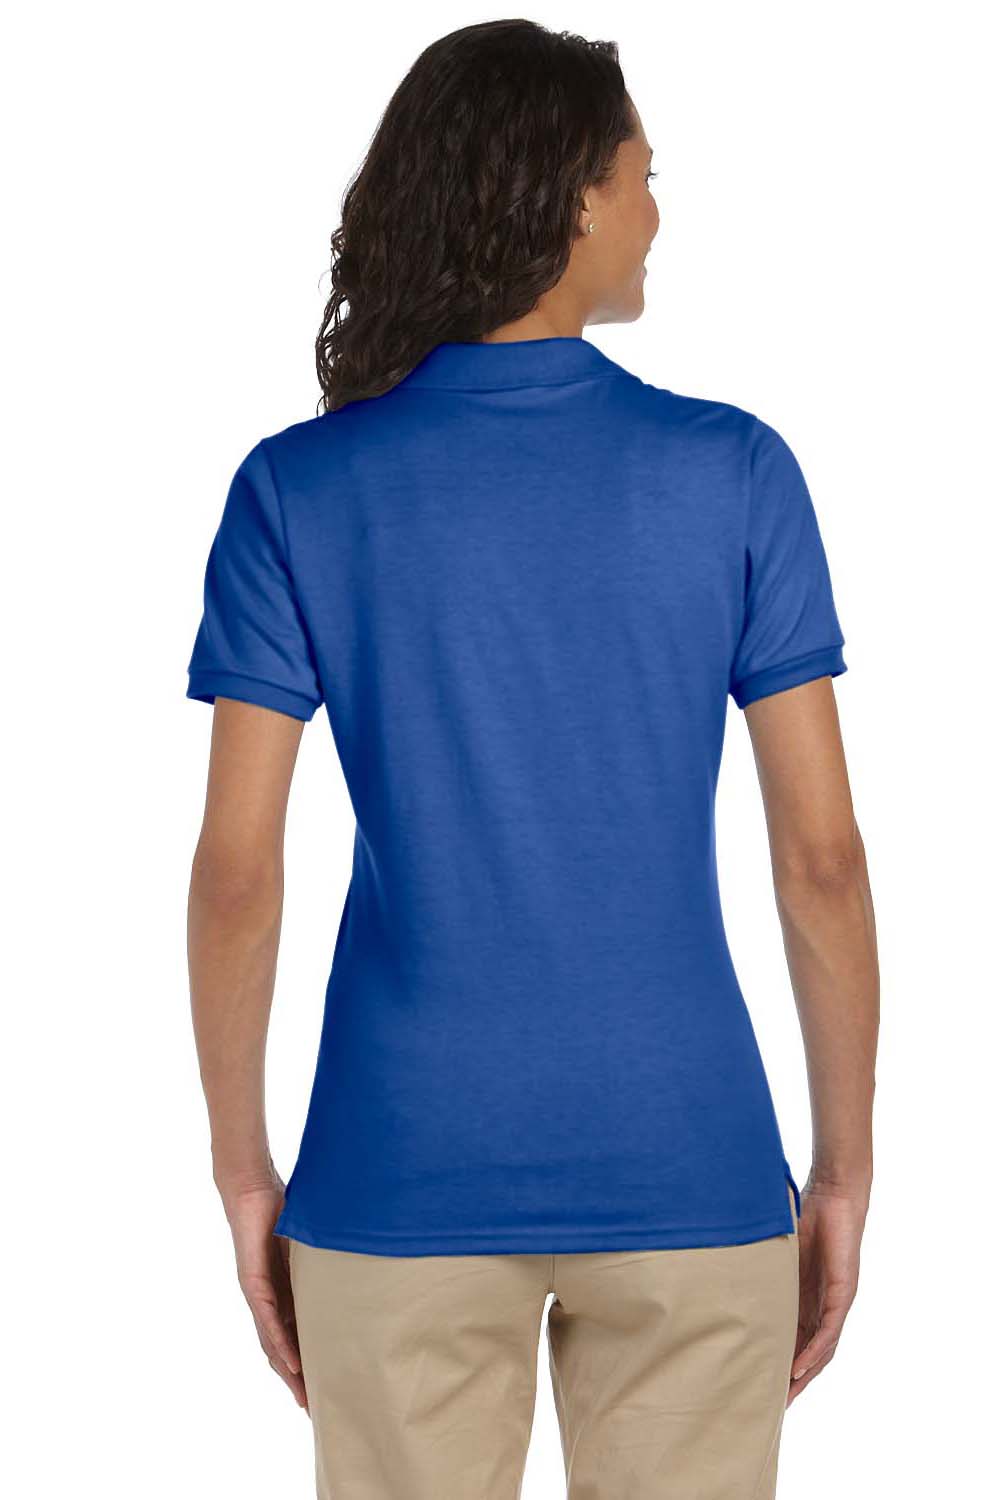 Jerzees 437W Womens SpotShield Stain Resistant Short Sleeve Polo Shirt Royal Blue Back